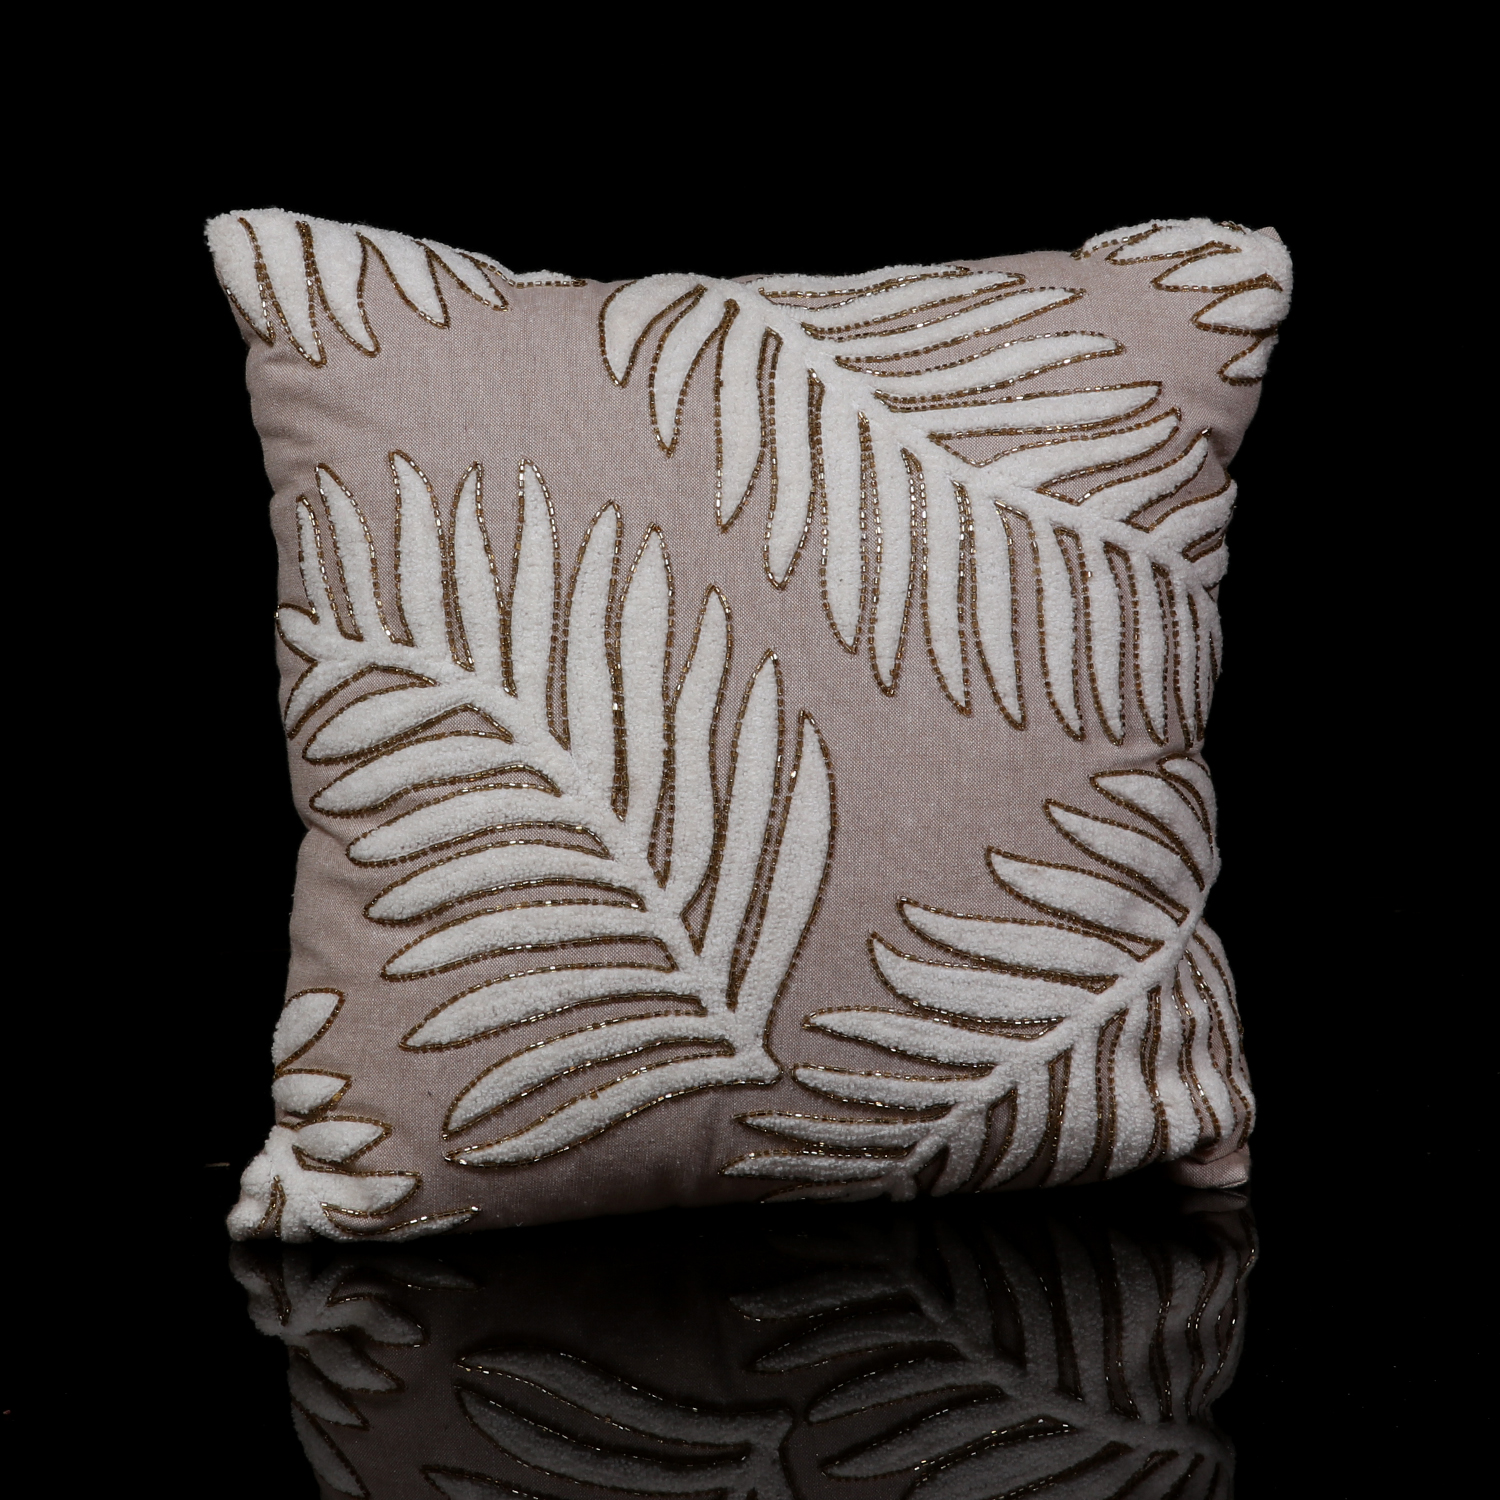 EMBROIDED FERNS DESIGN PILLOW EMBELLISHED WITH BEADS